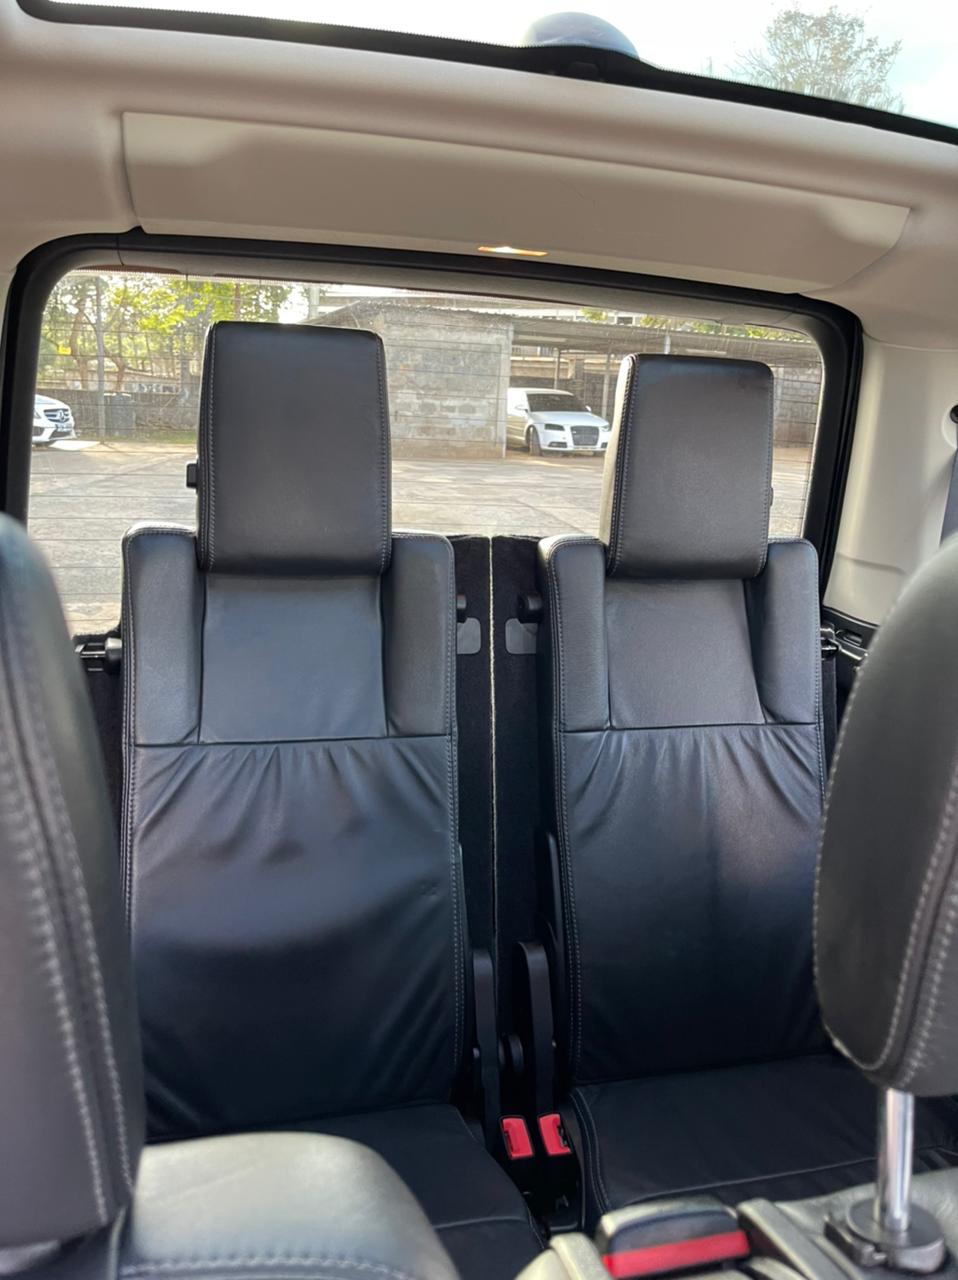 DISCOVERY 4 HSE 2014 LR4 Triple Sunroof new On offer